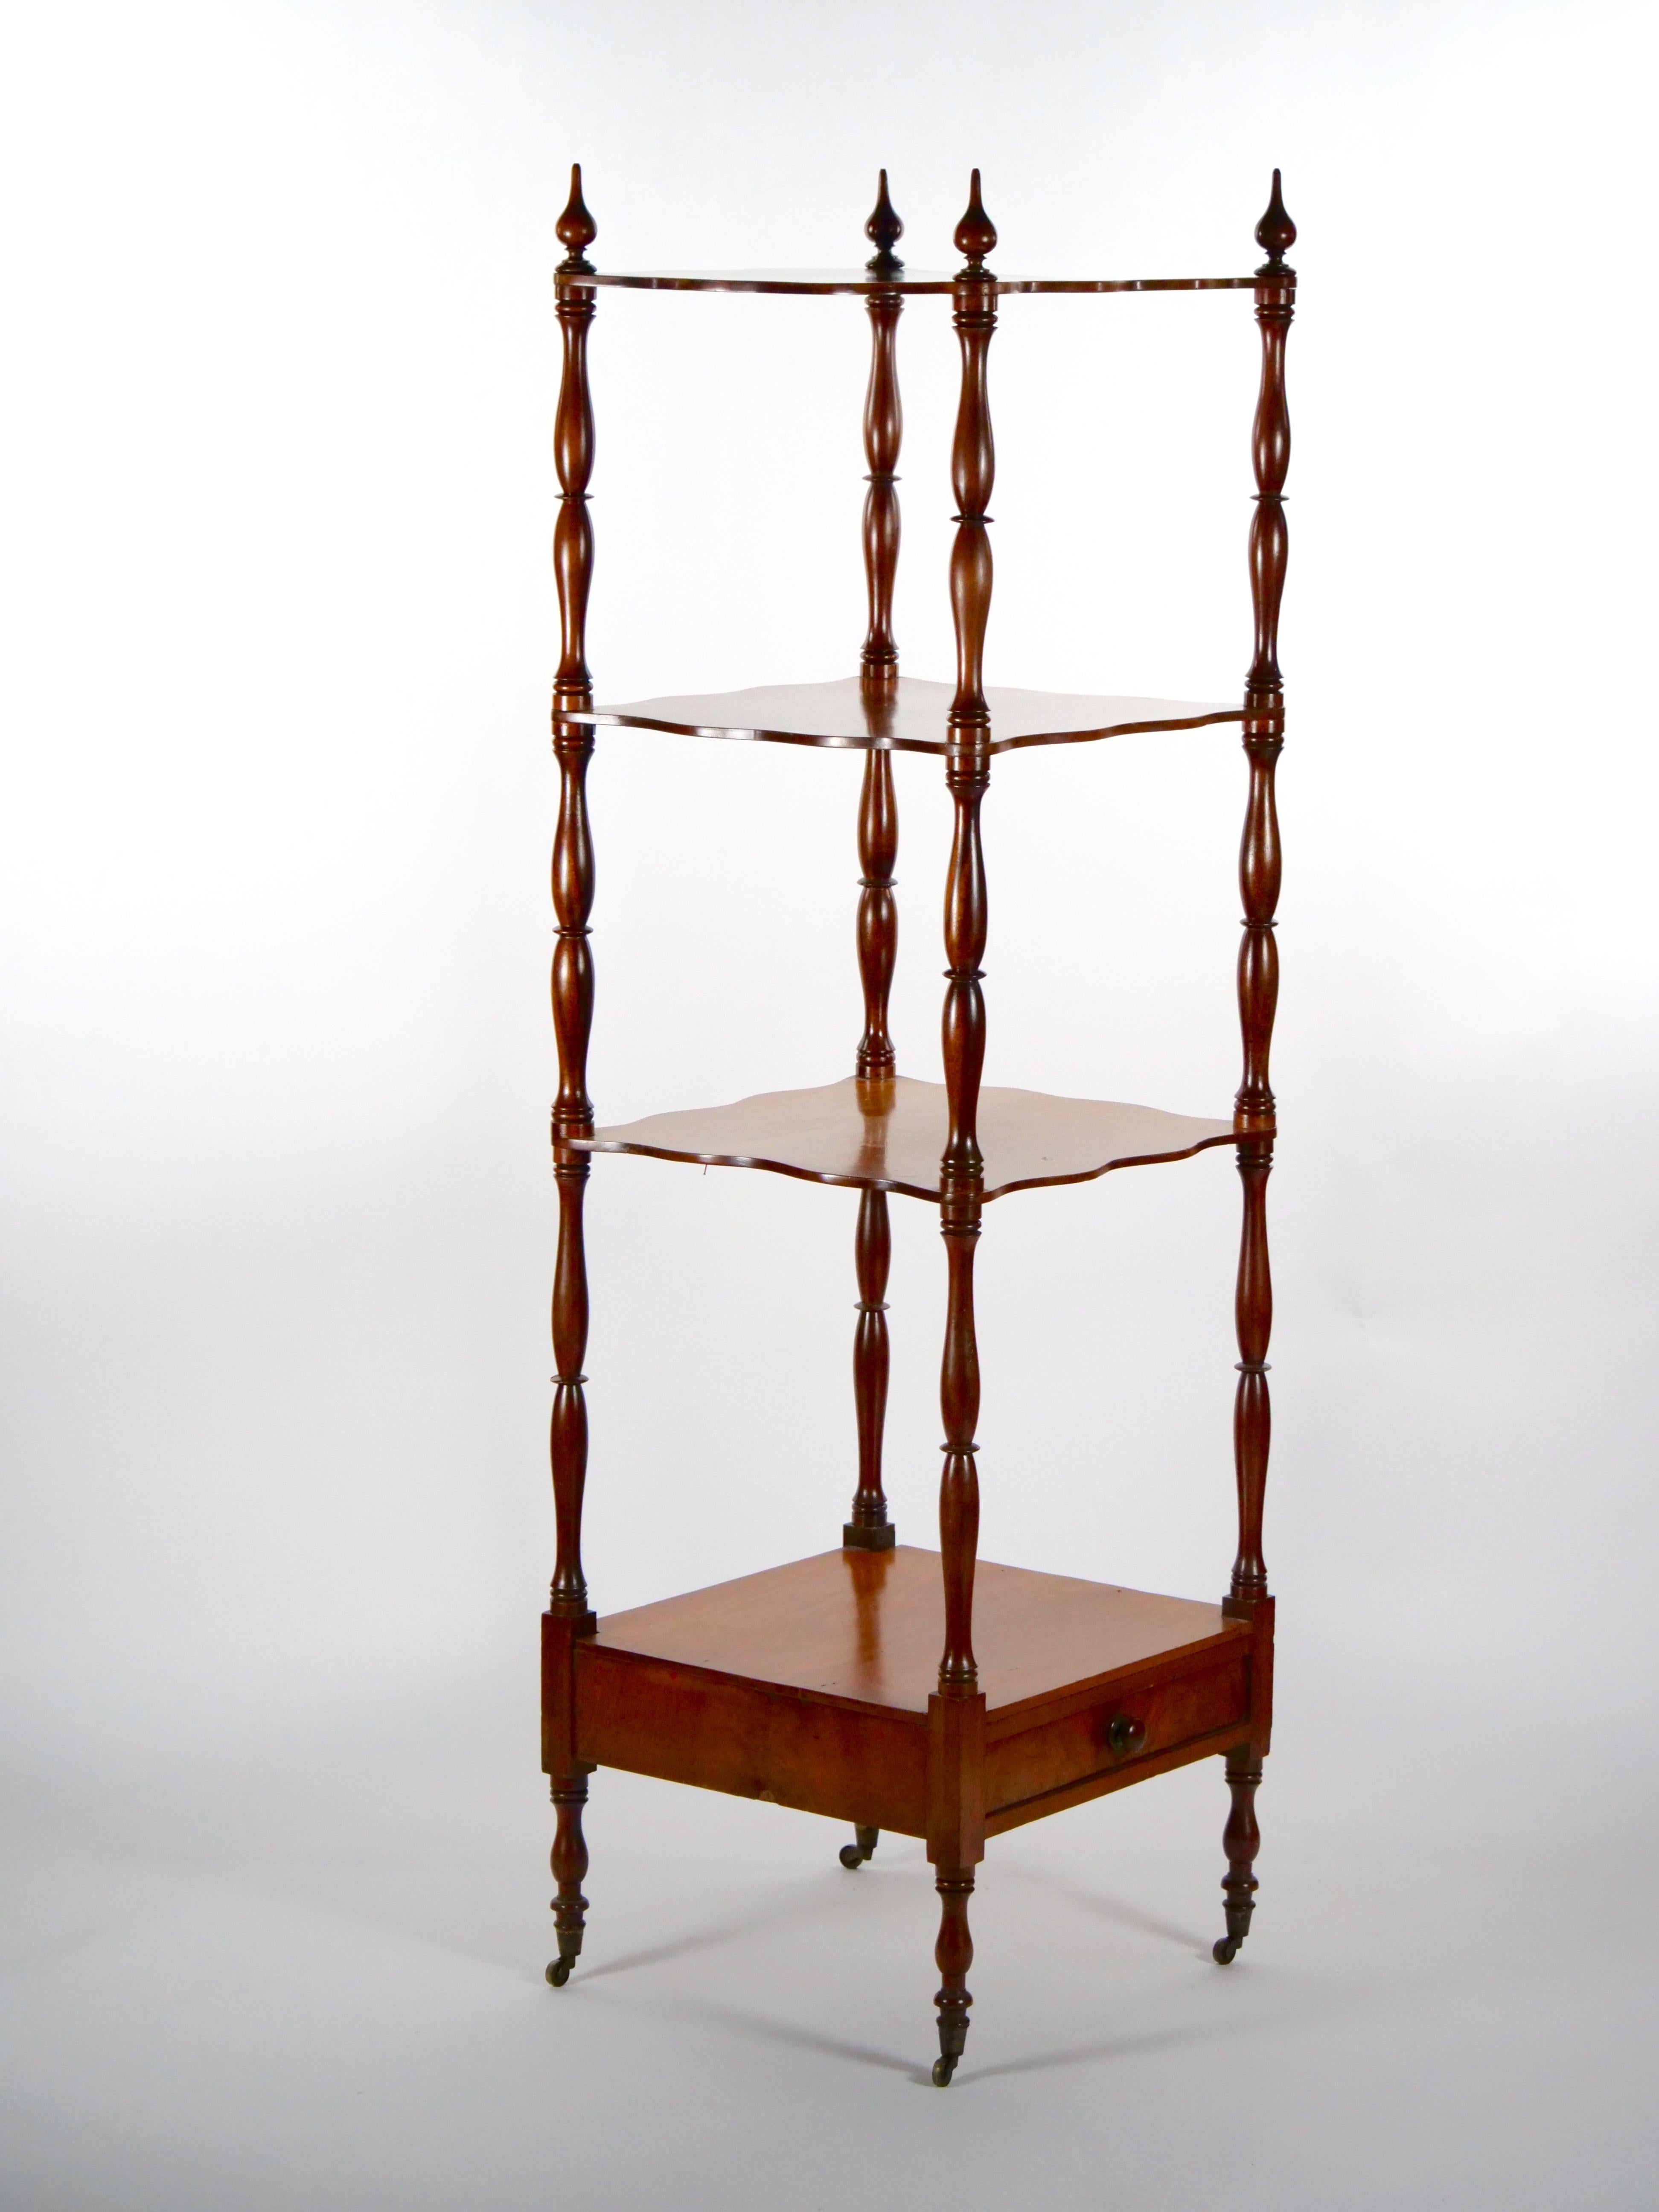 English Regency style mahogany wood four tiered display etagere with single drawer below lowest shelf. The display etagere features four turned ball finials at each corner of upper gallery resting on four feet. It is in great condition with minor